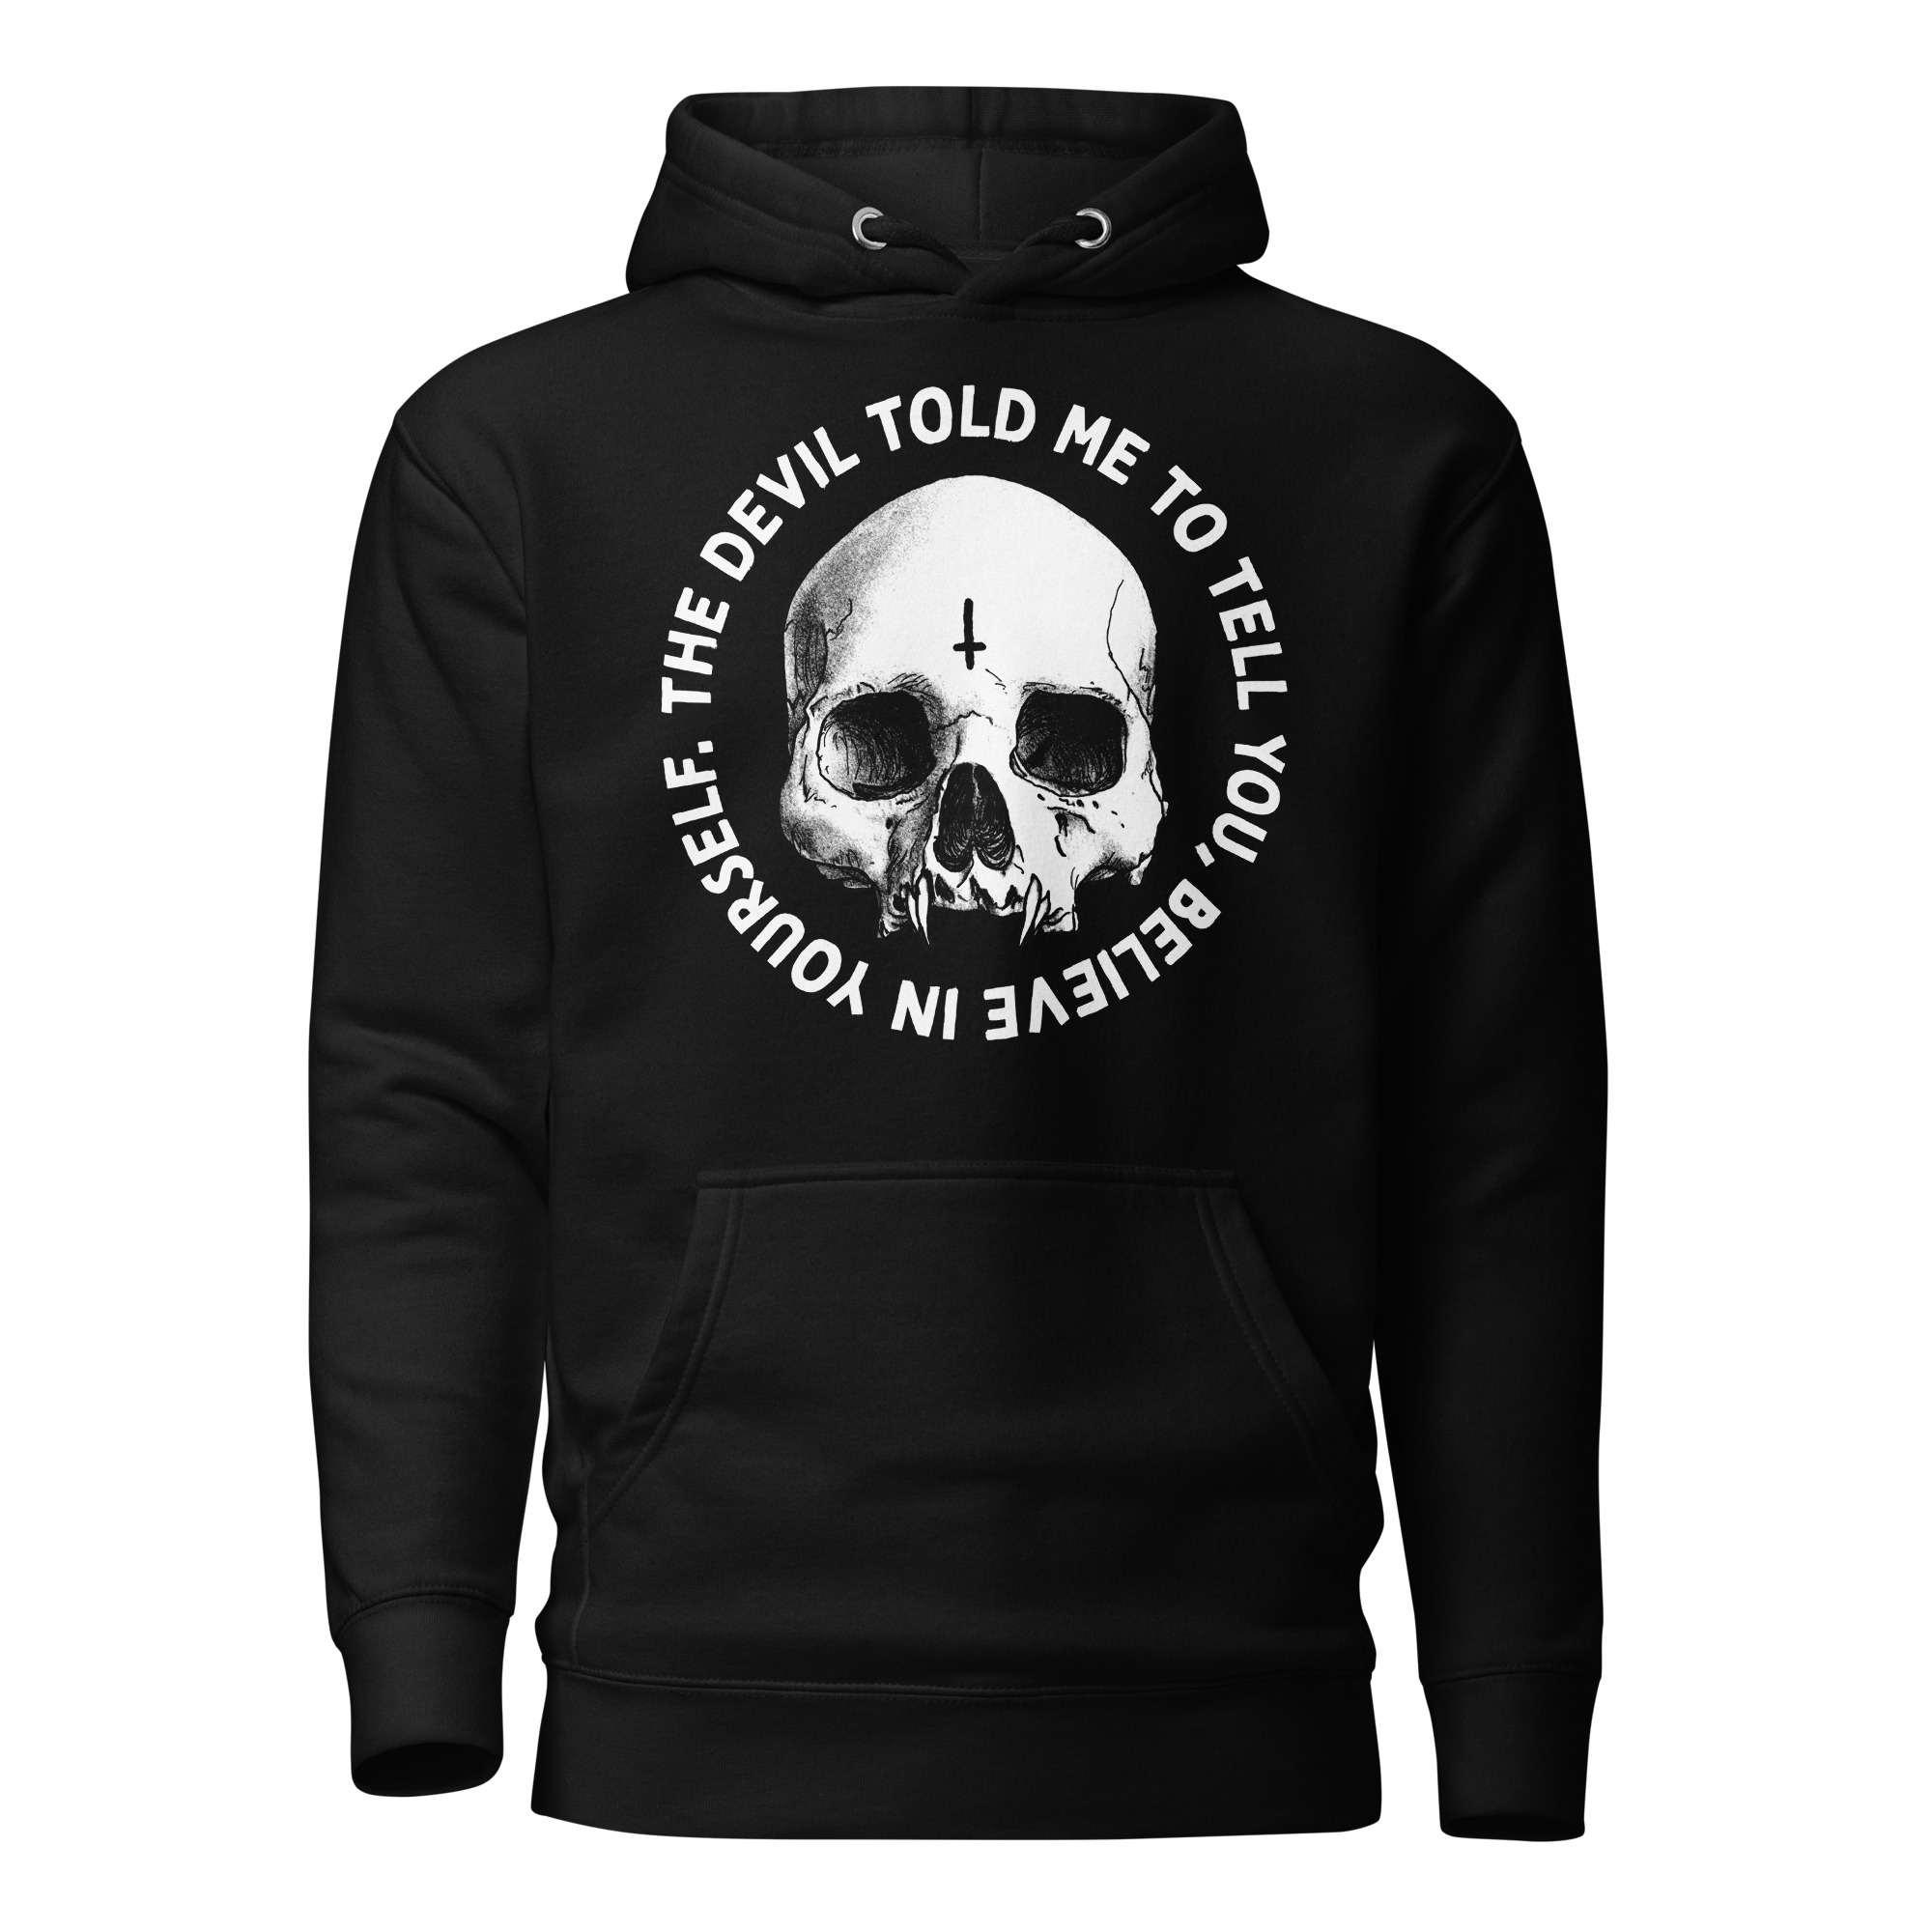 Featured image for “The devil told me to tell you - Unisex Premium Hoodie”